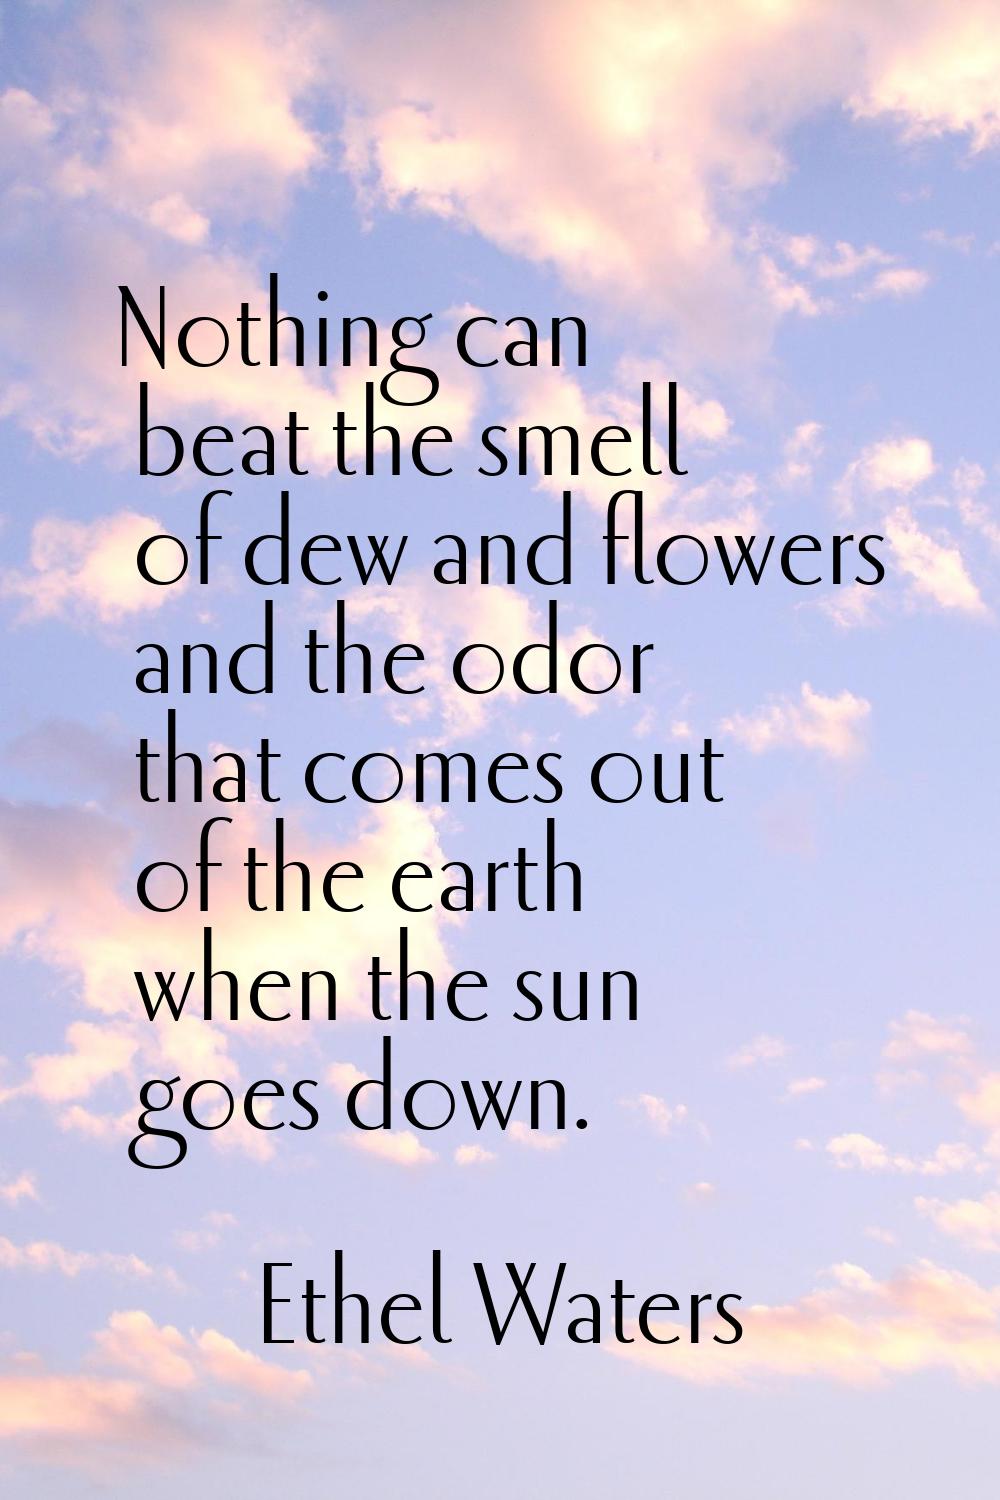 Nothing can beat the smell of dew and flowers and the odor that comes out of the earth when the sun